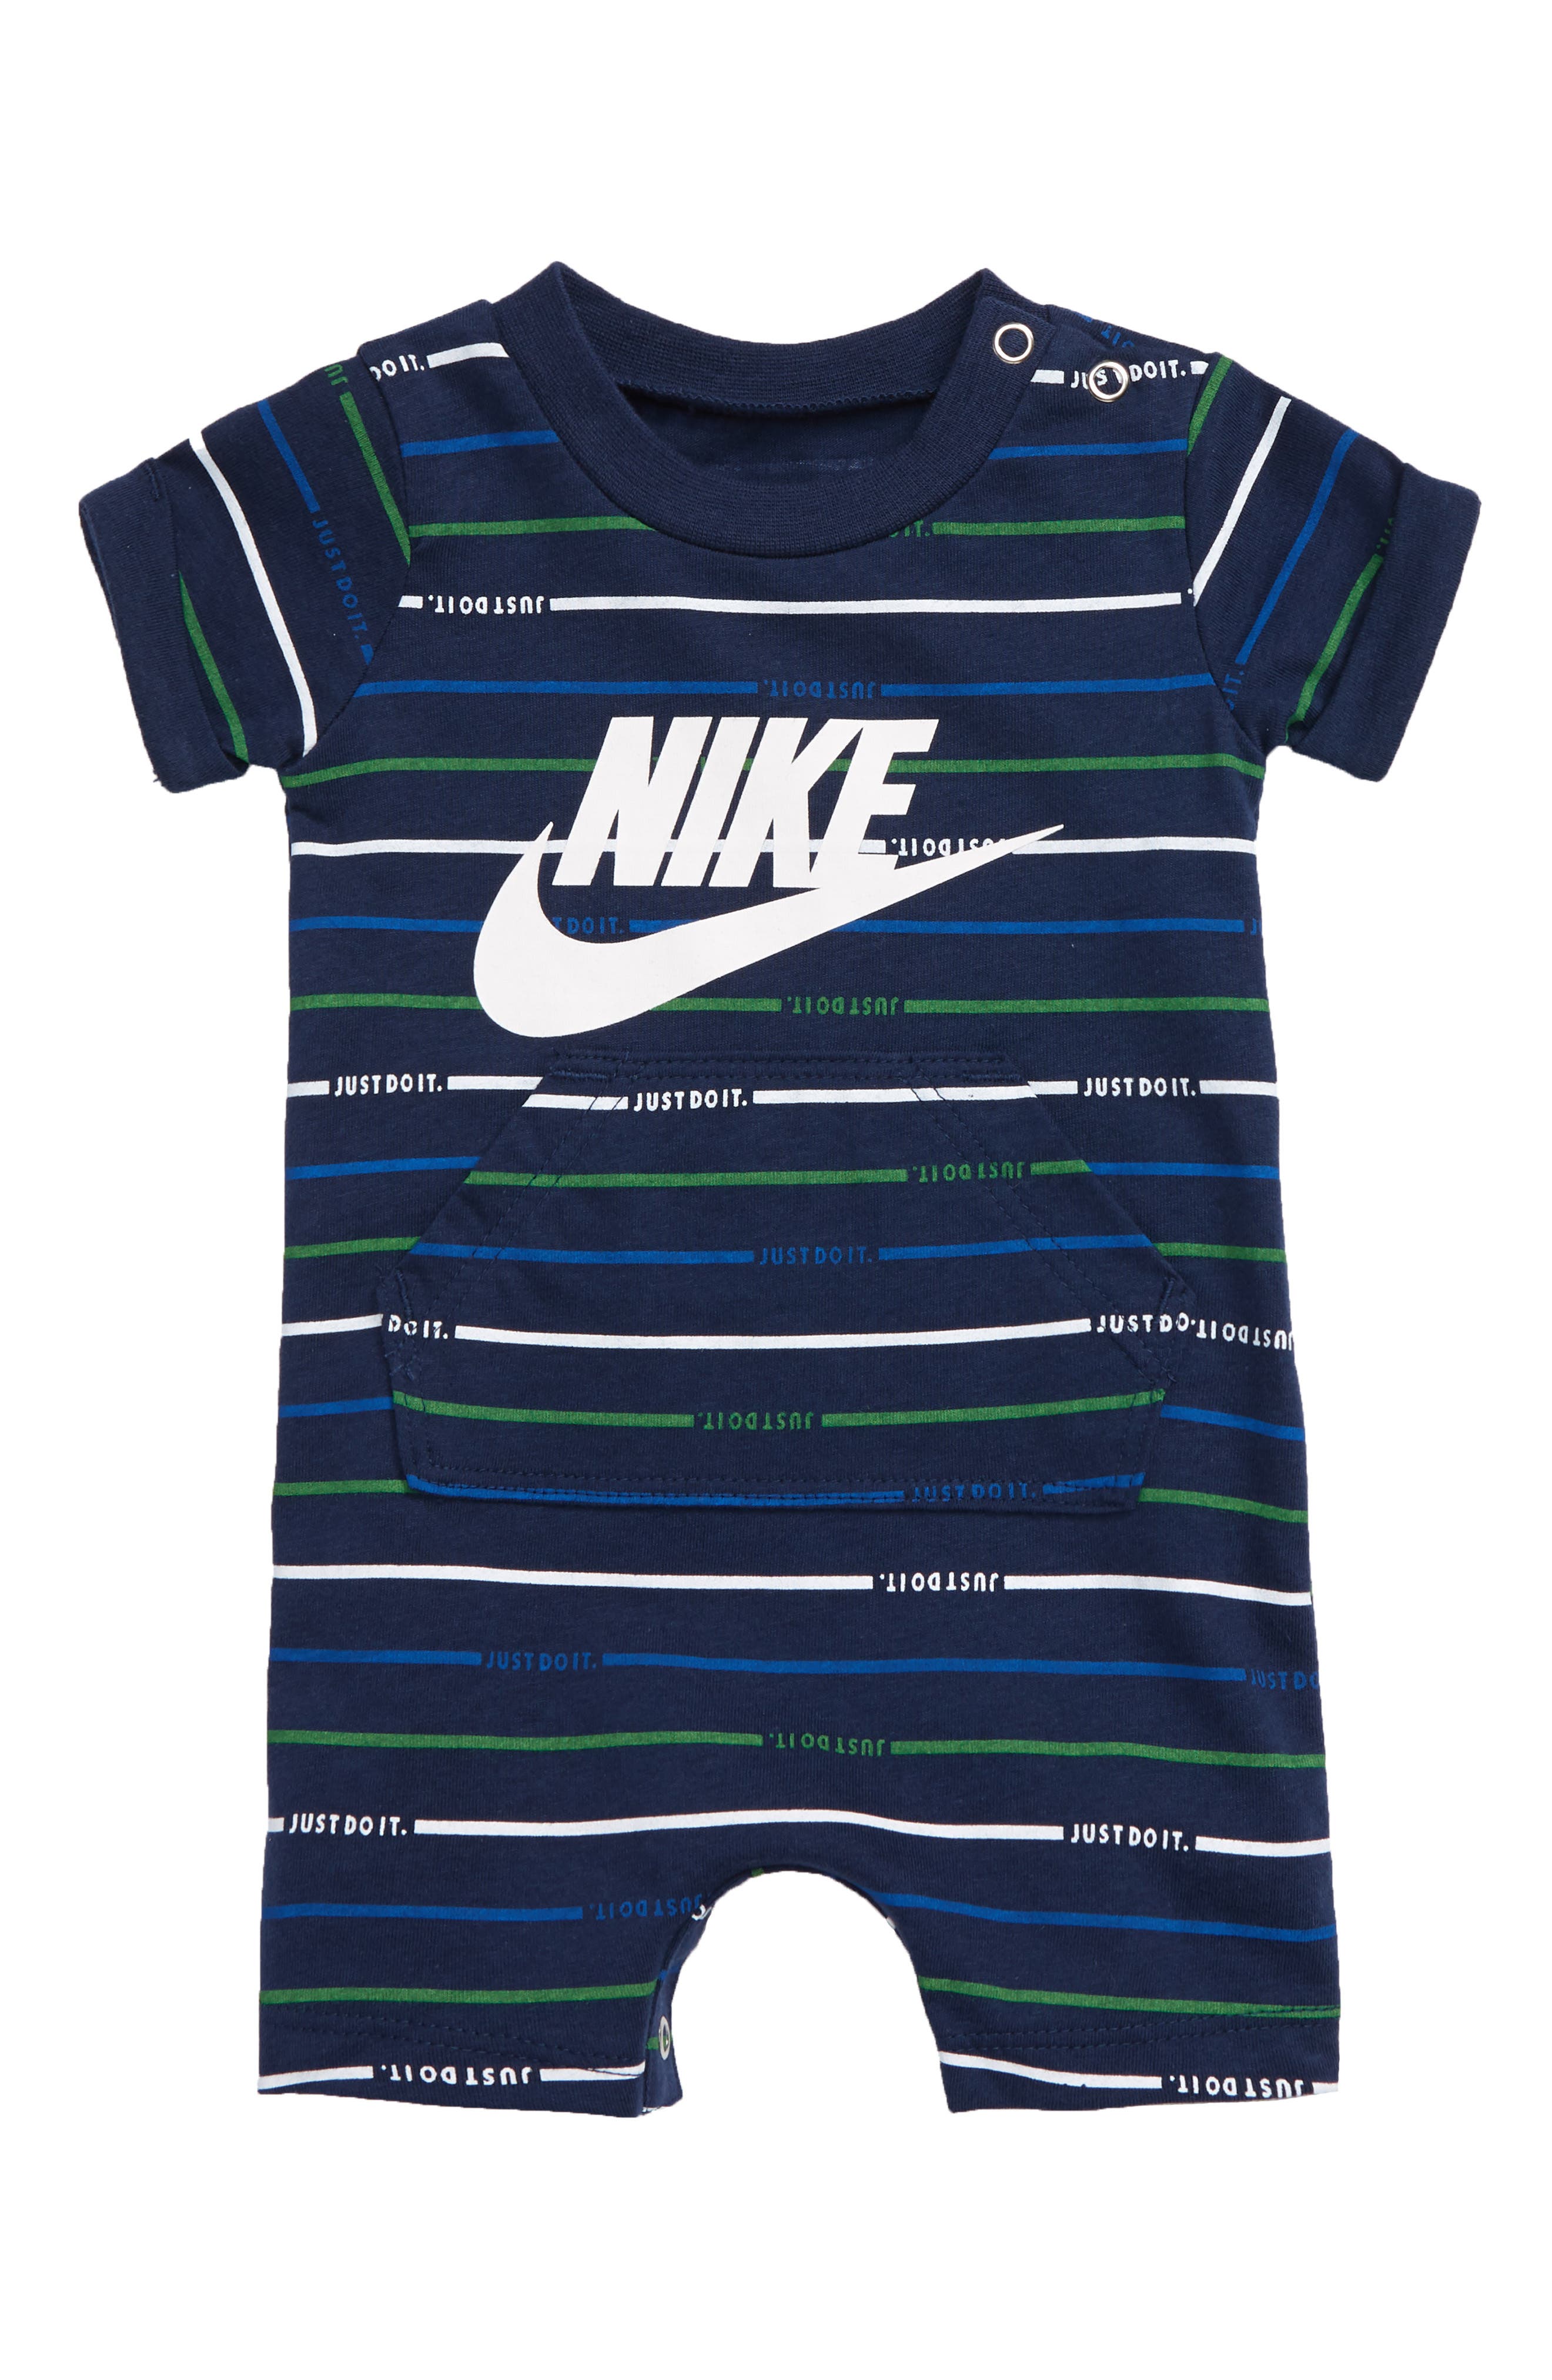 infant baby boy nike clothes